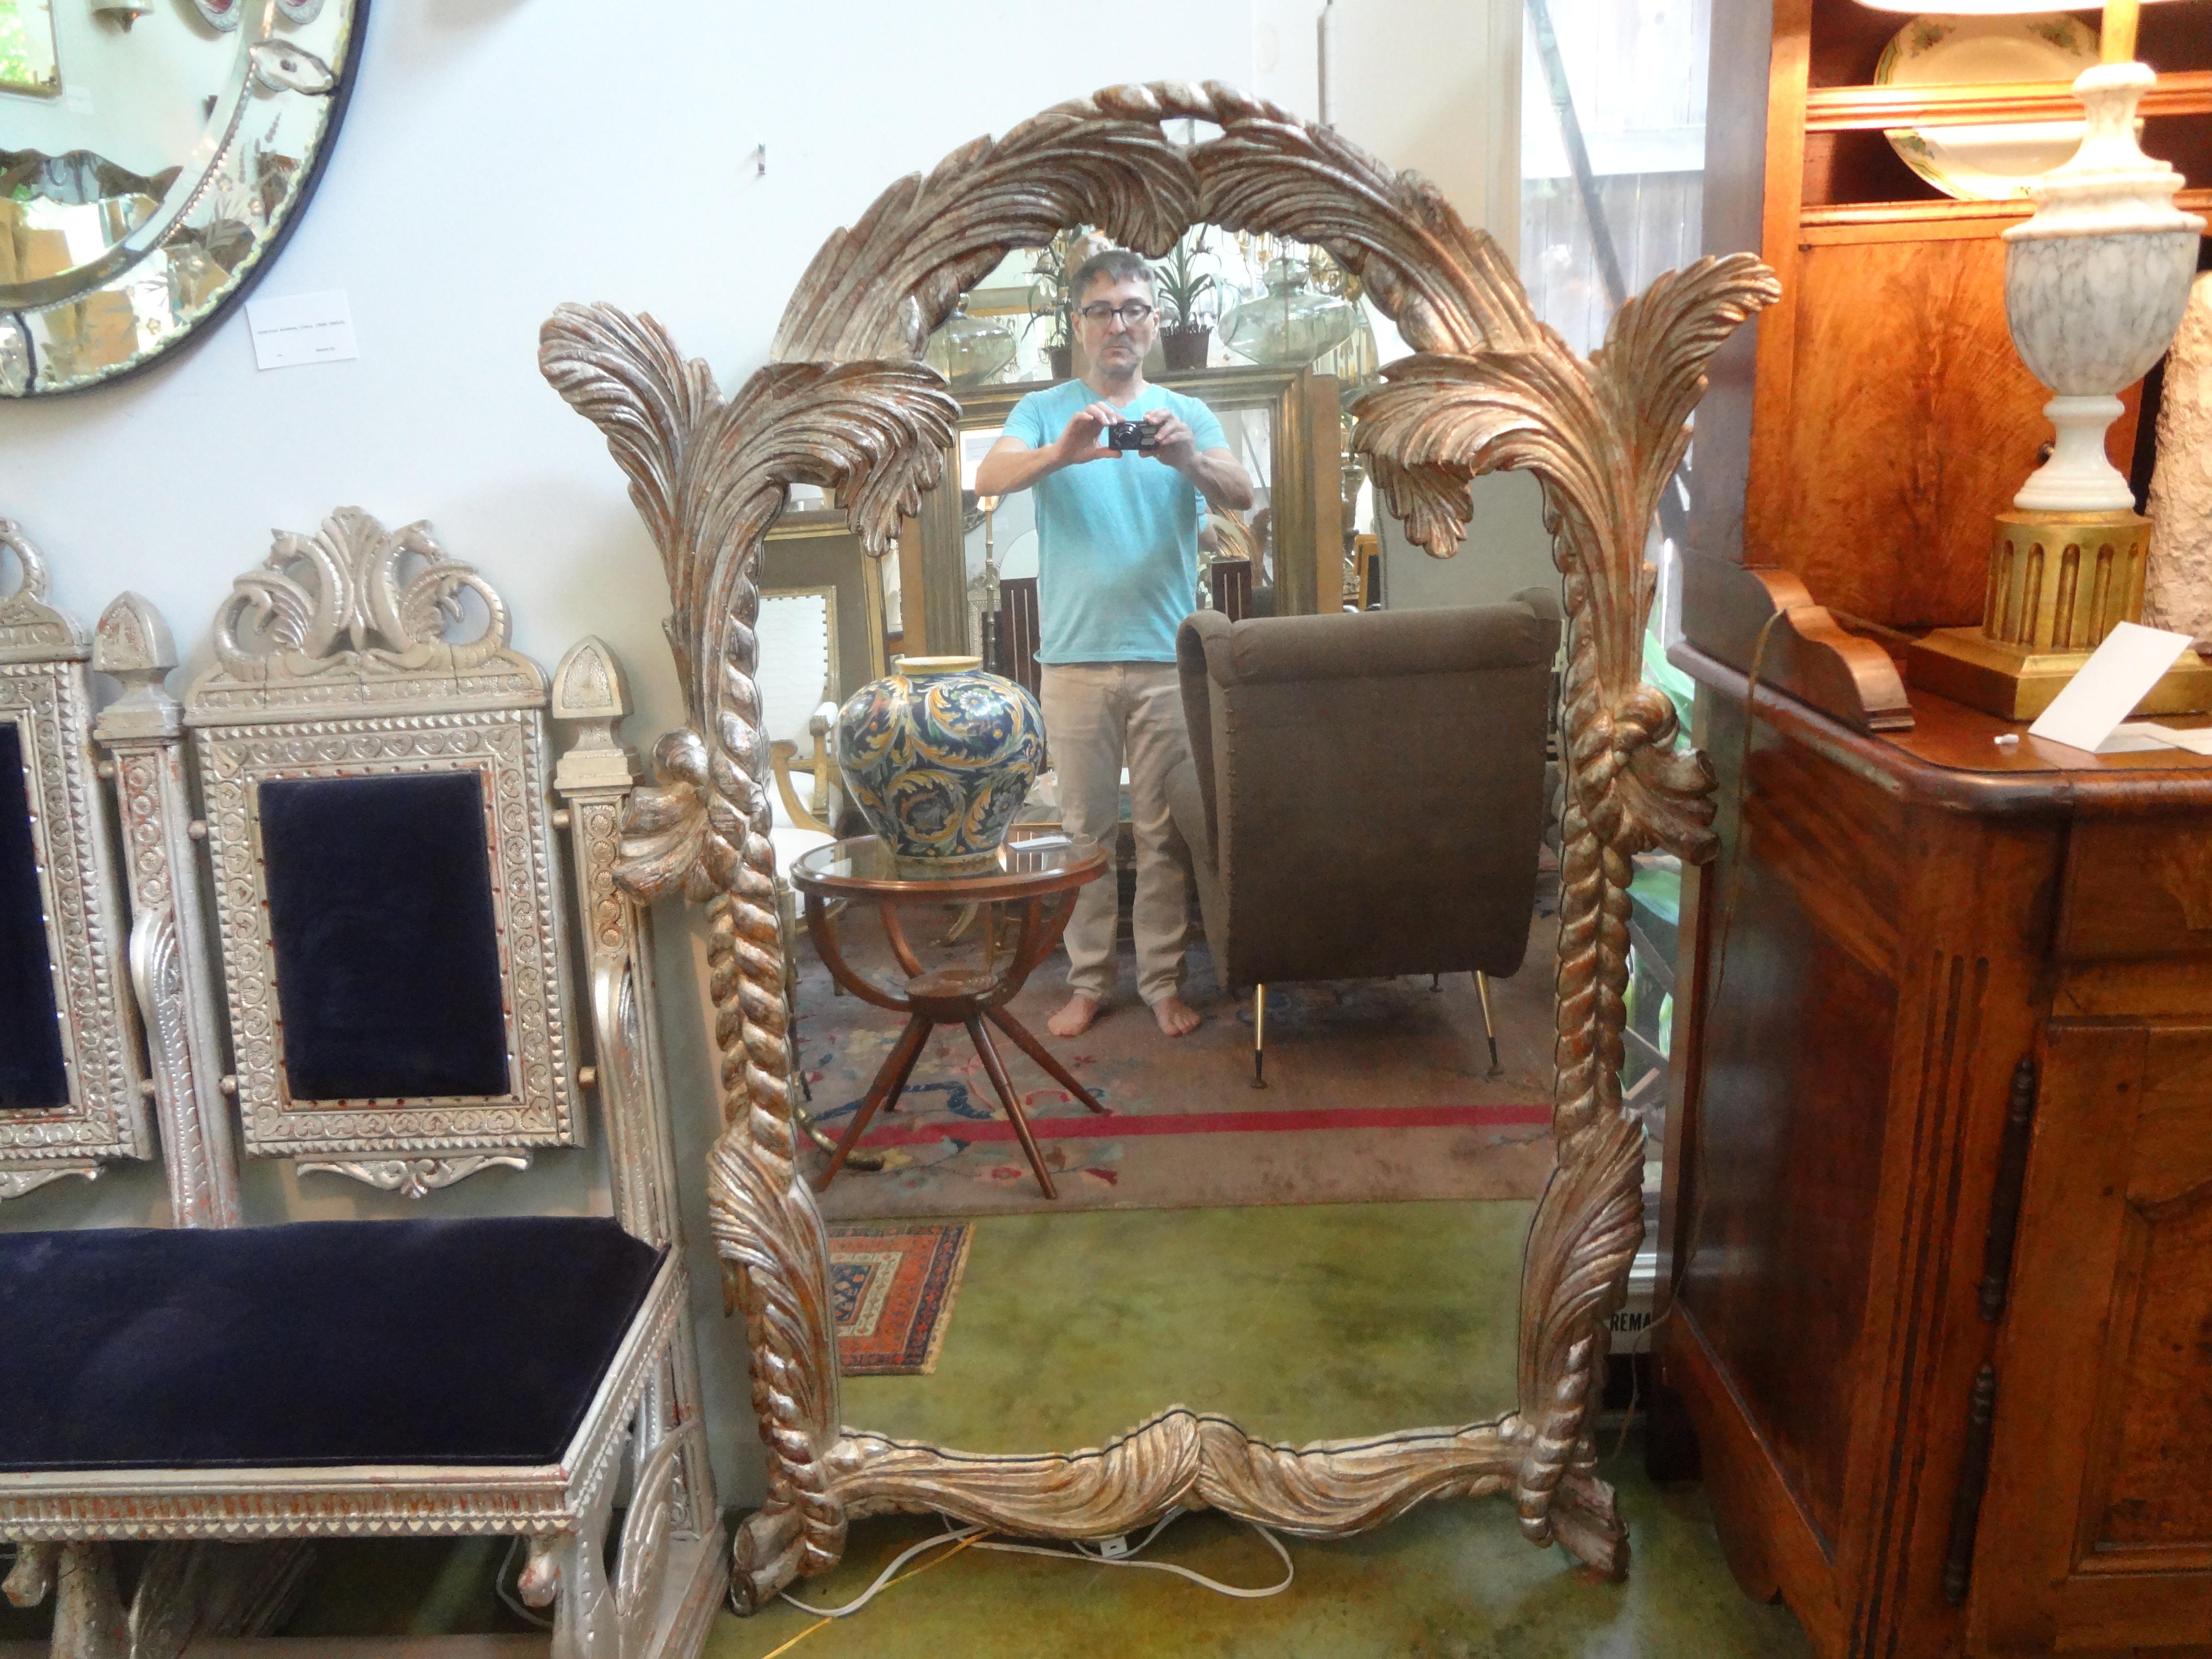 Stunning large Italian midcentury carved wood silver leaf mirror. This beautiful Italian Hollywood Regency silver gilt mirror has a palm frond motif. Featured Serge Roche, Dorothy Draper or John Dickinson inspired silver leaf floor mirror or